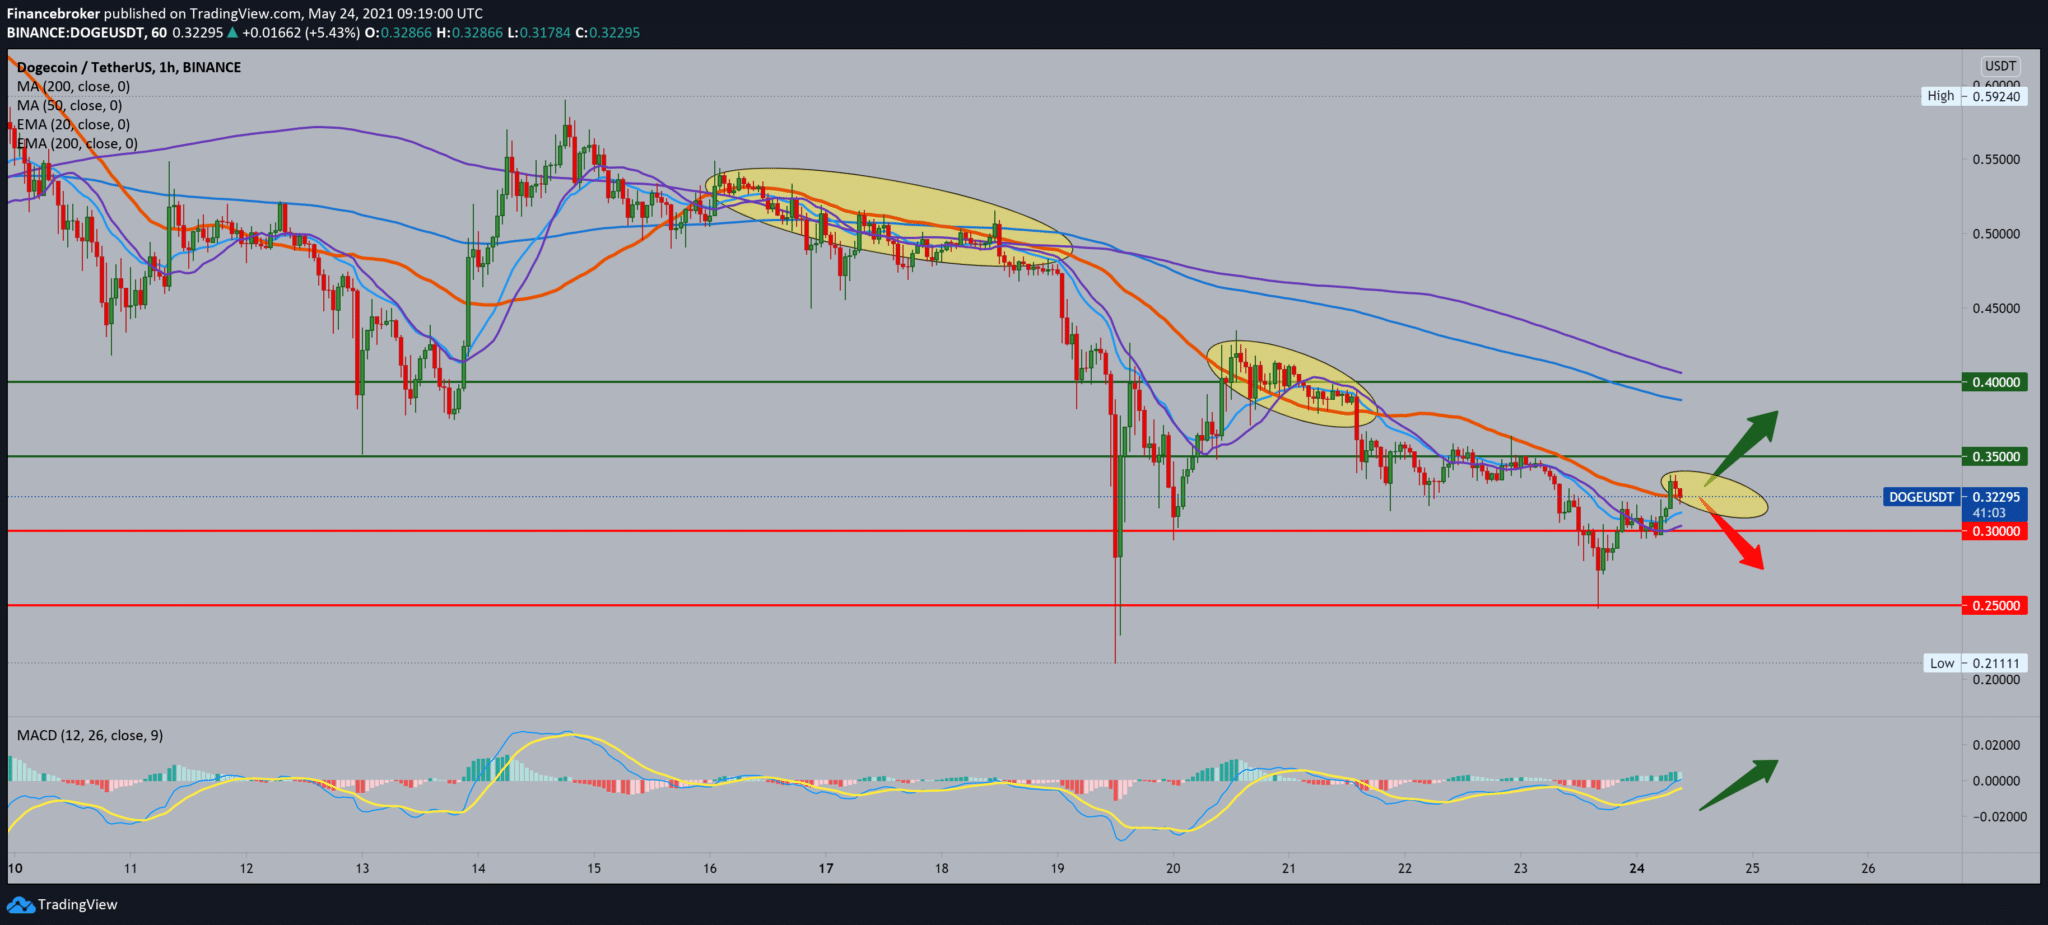 Dogecoin support above 0.30000